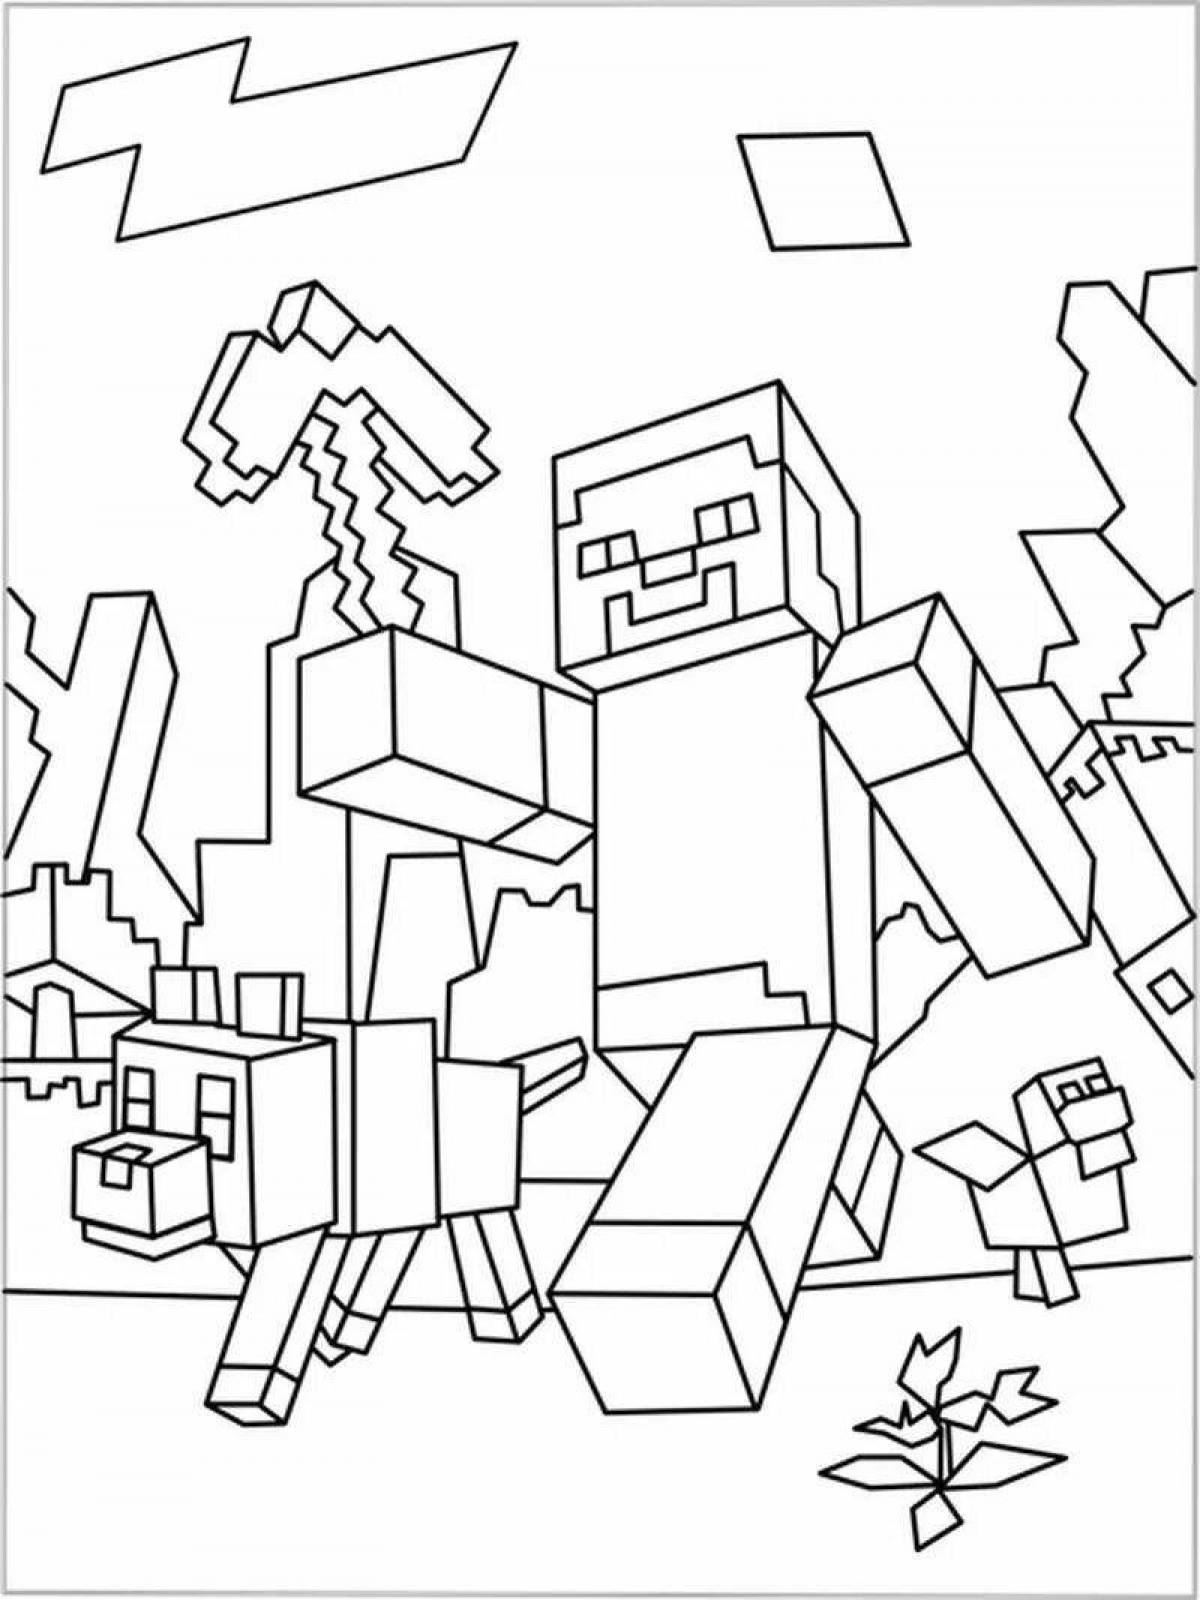 Exquisite minecraft portal coloring page